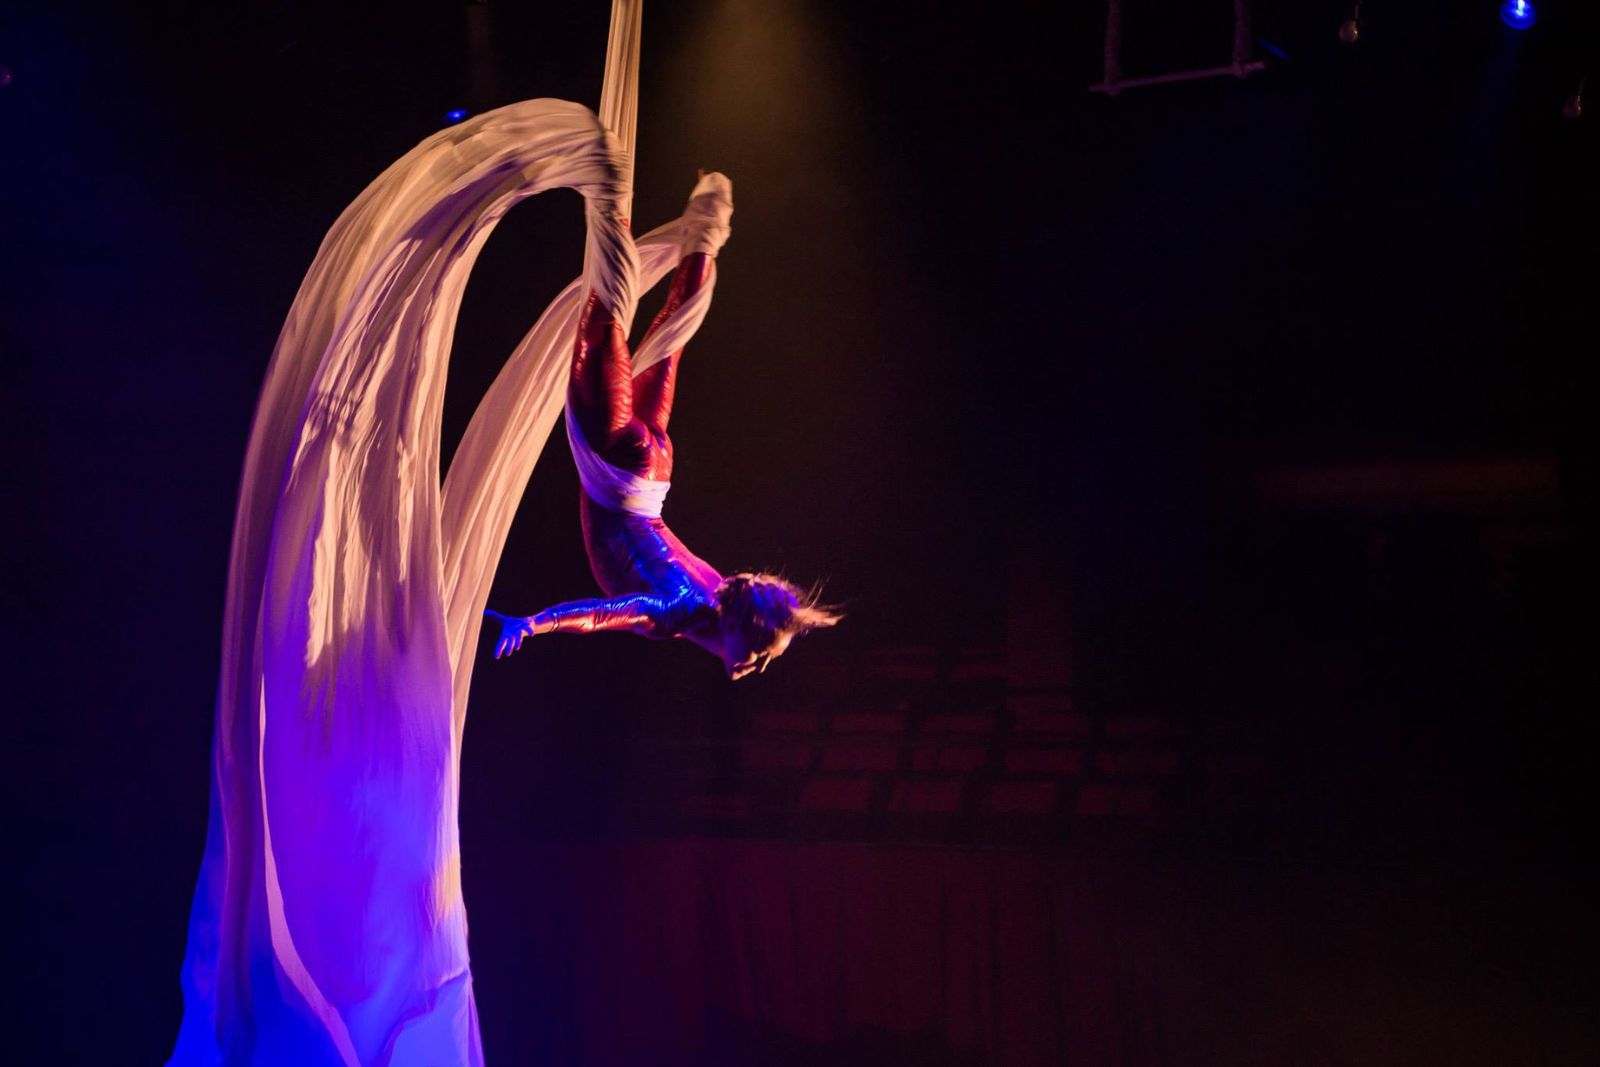 A woman performing stunt in the circus.